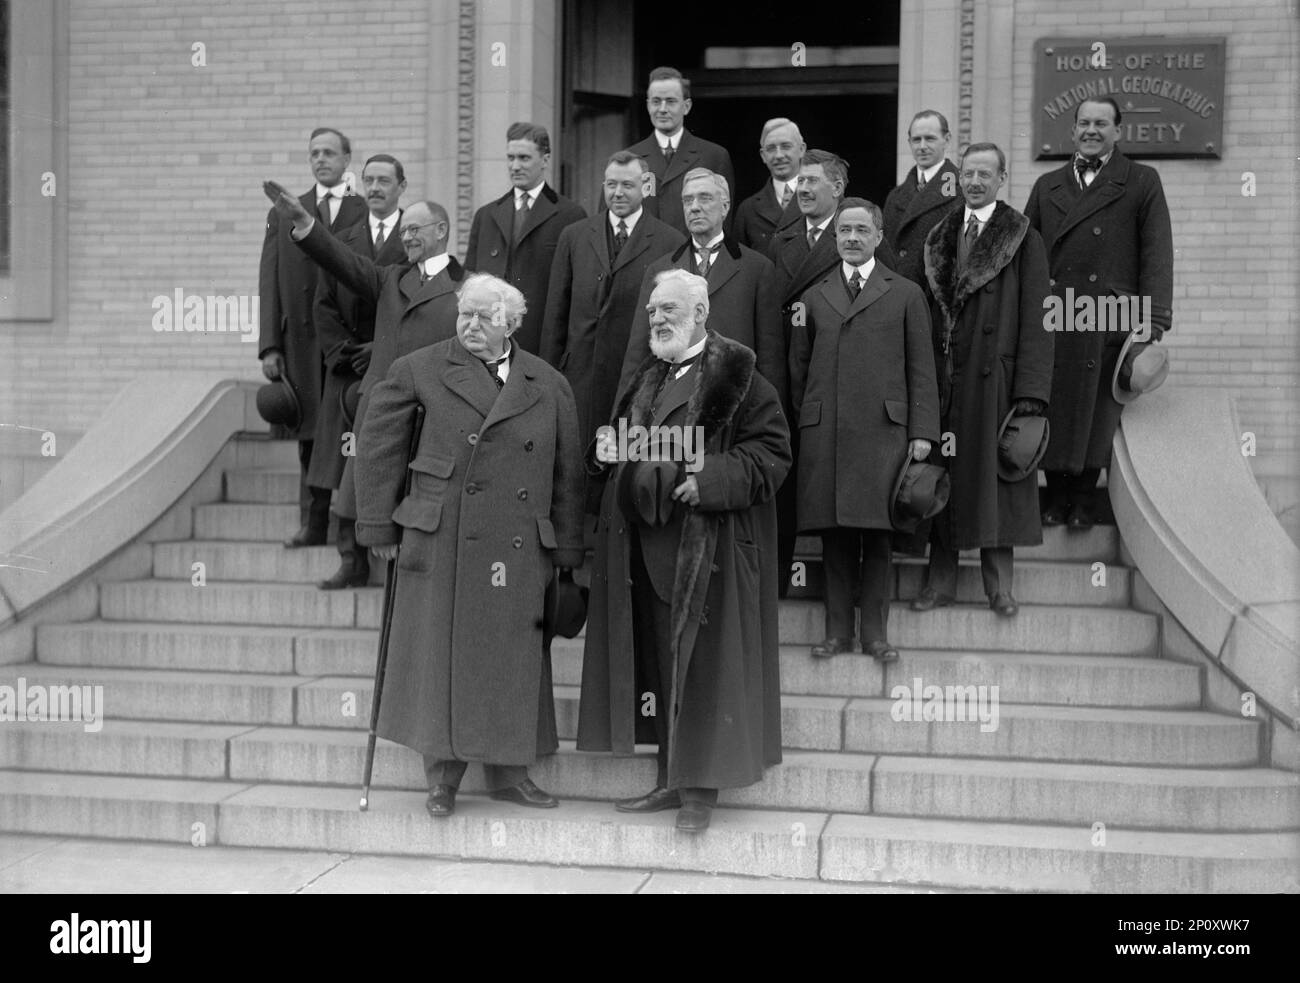 National Geographic Society. Anniversary of Bell Telephone. Front: Theodore Newton Vail And Alexander Graham Bell; Back of Bell, Thomas Augustus Watson, Assoc. with Bell in Experiments. Diagonally Upward, Right: John .J. Carty; G.H. Grosvenor; J.O. Lagorce, 1916. Stock Photo